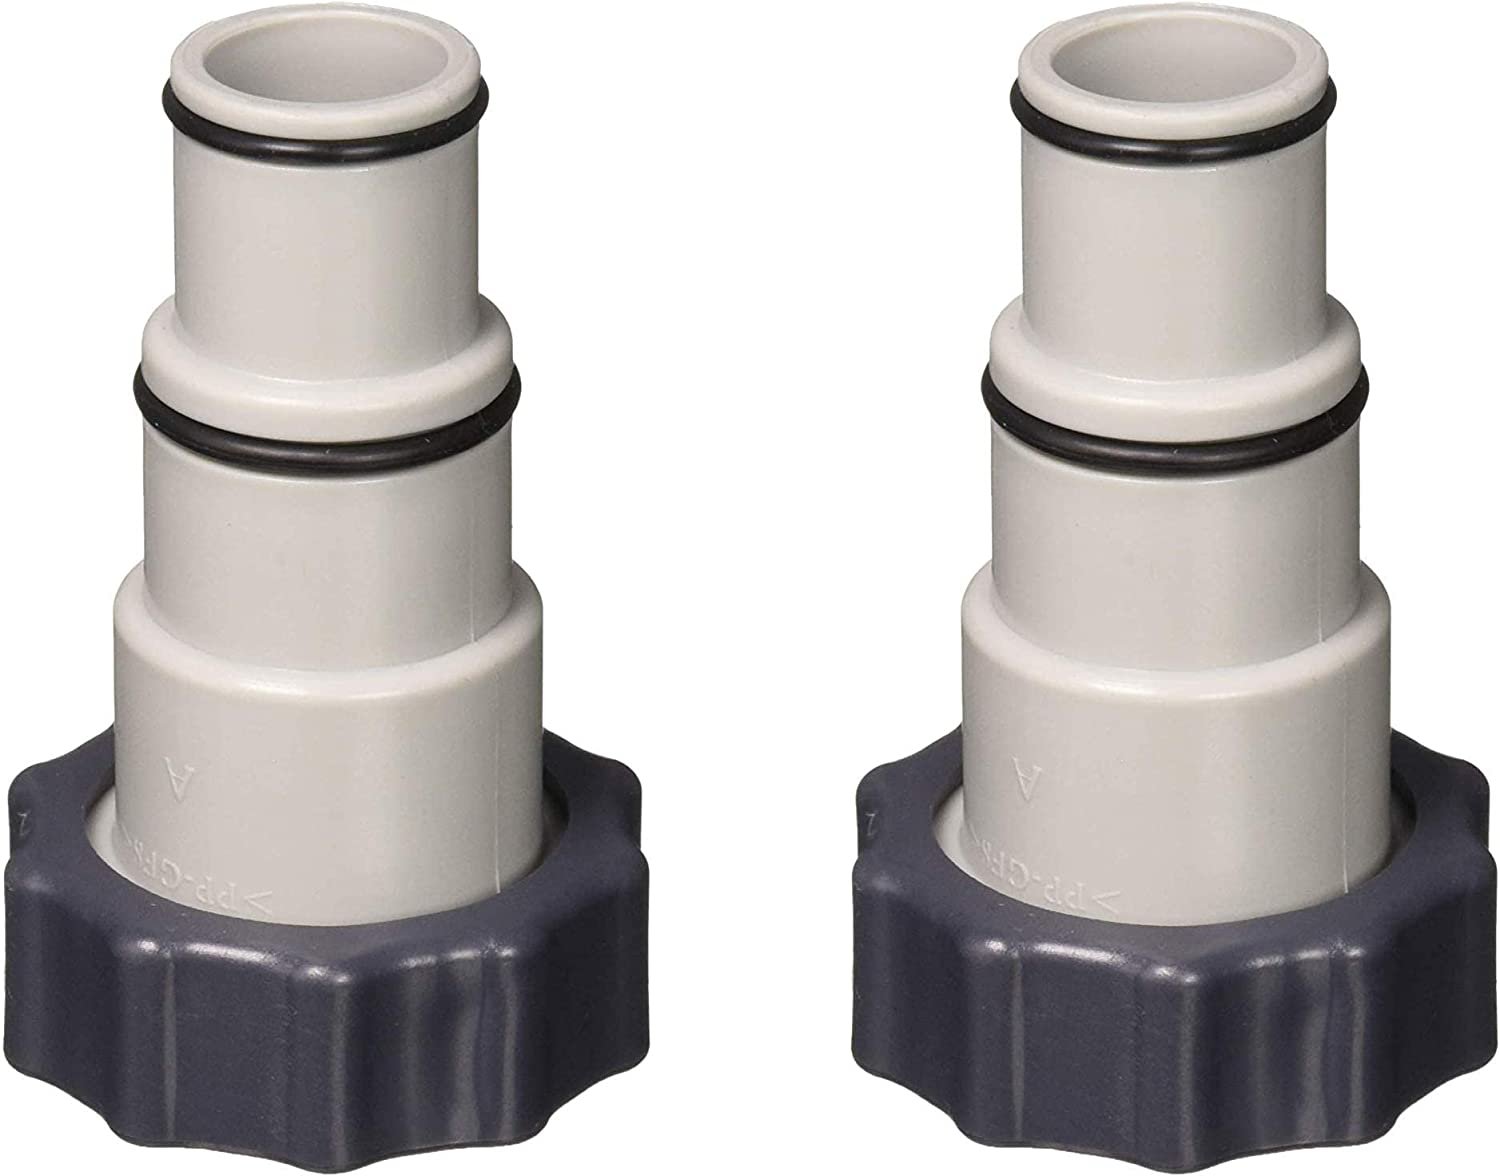 Intex Replacement Hose Adapter A w/Collar for Threaded Connection Pumps (Pair)